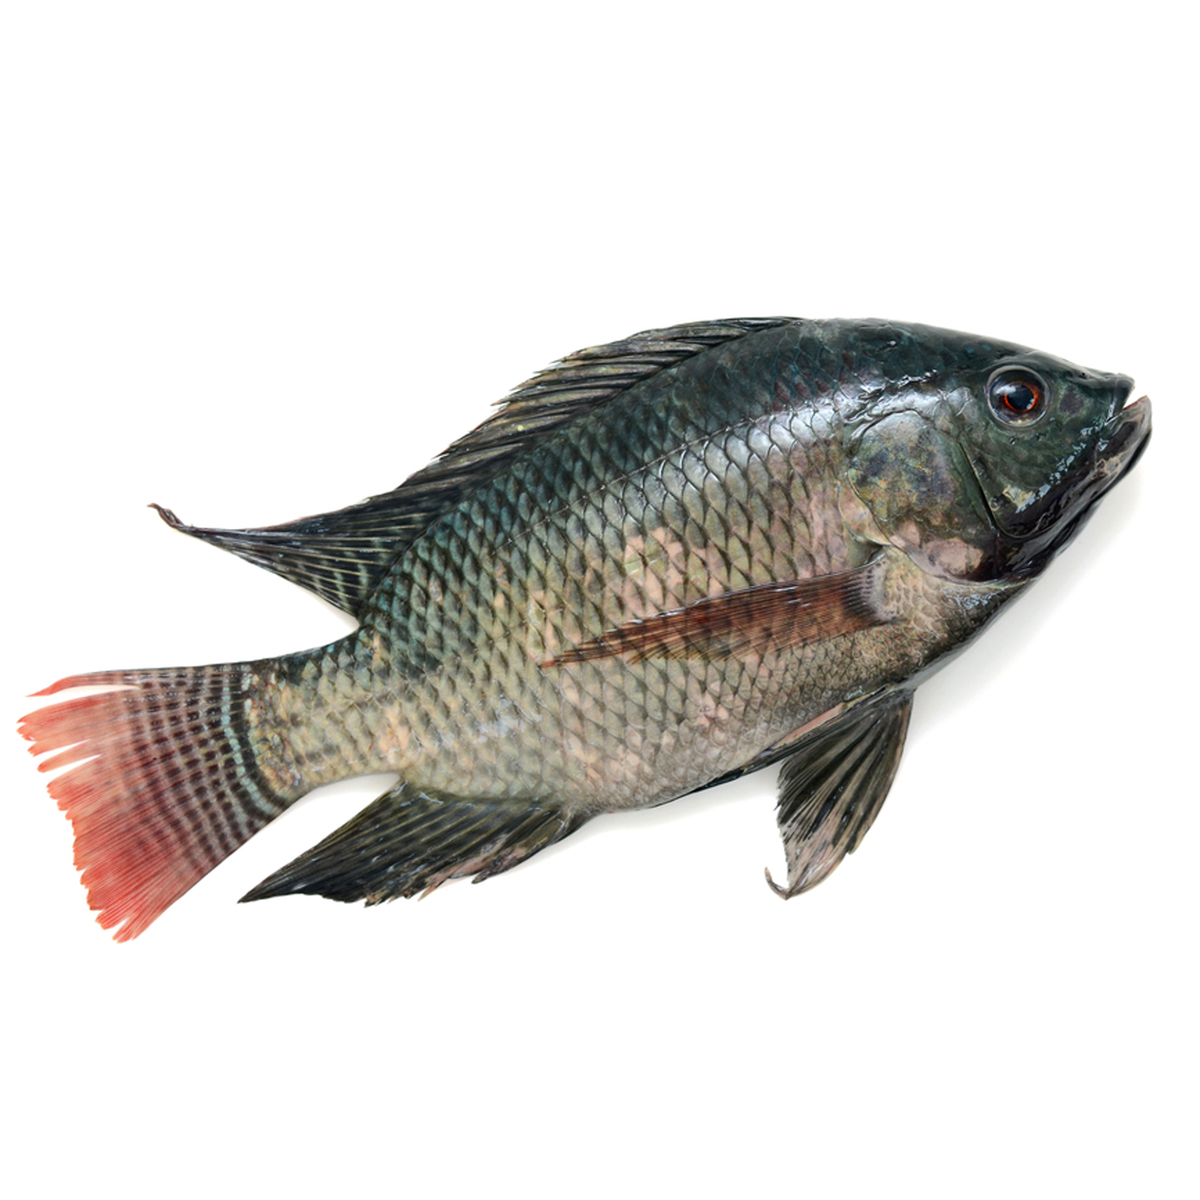 Black Tilapia 1Kg Approx. Weight